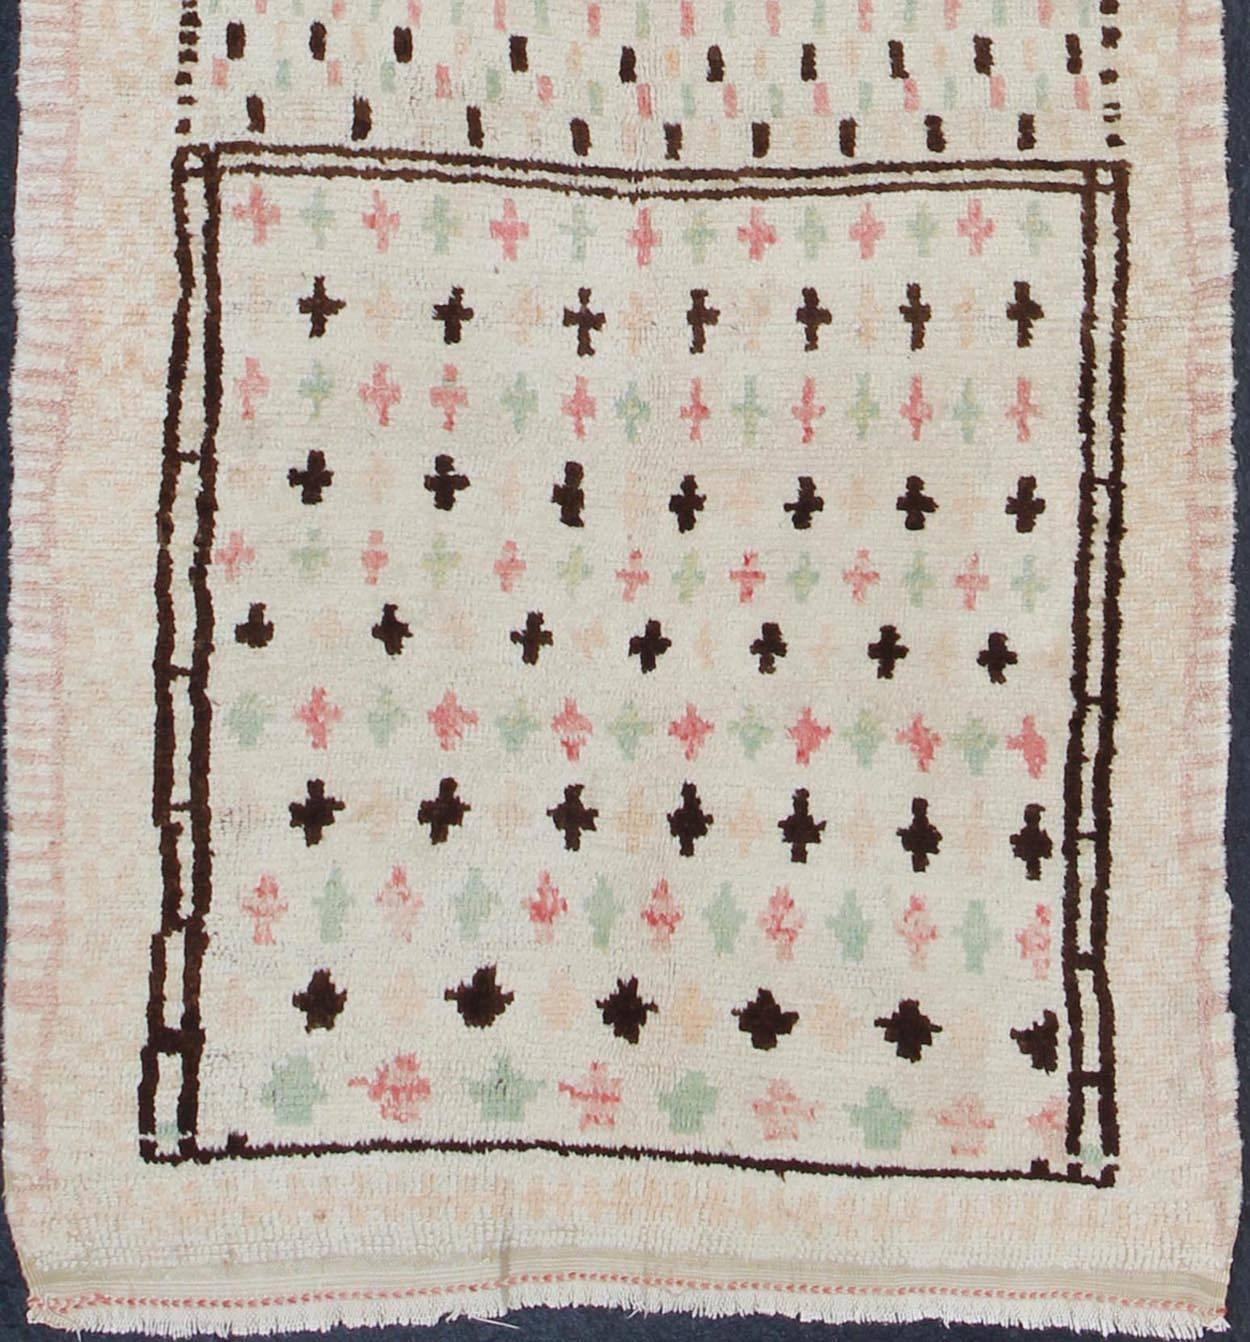 Unique Moroccan Runner in Light Ivory Background & Brown, Rose, Green Accents.
Featuring cross shapes in an assortment of neutral colors, this unique Moroccan has an abstract flair. With three central flower motifs, it is an artistic and original